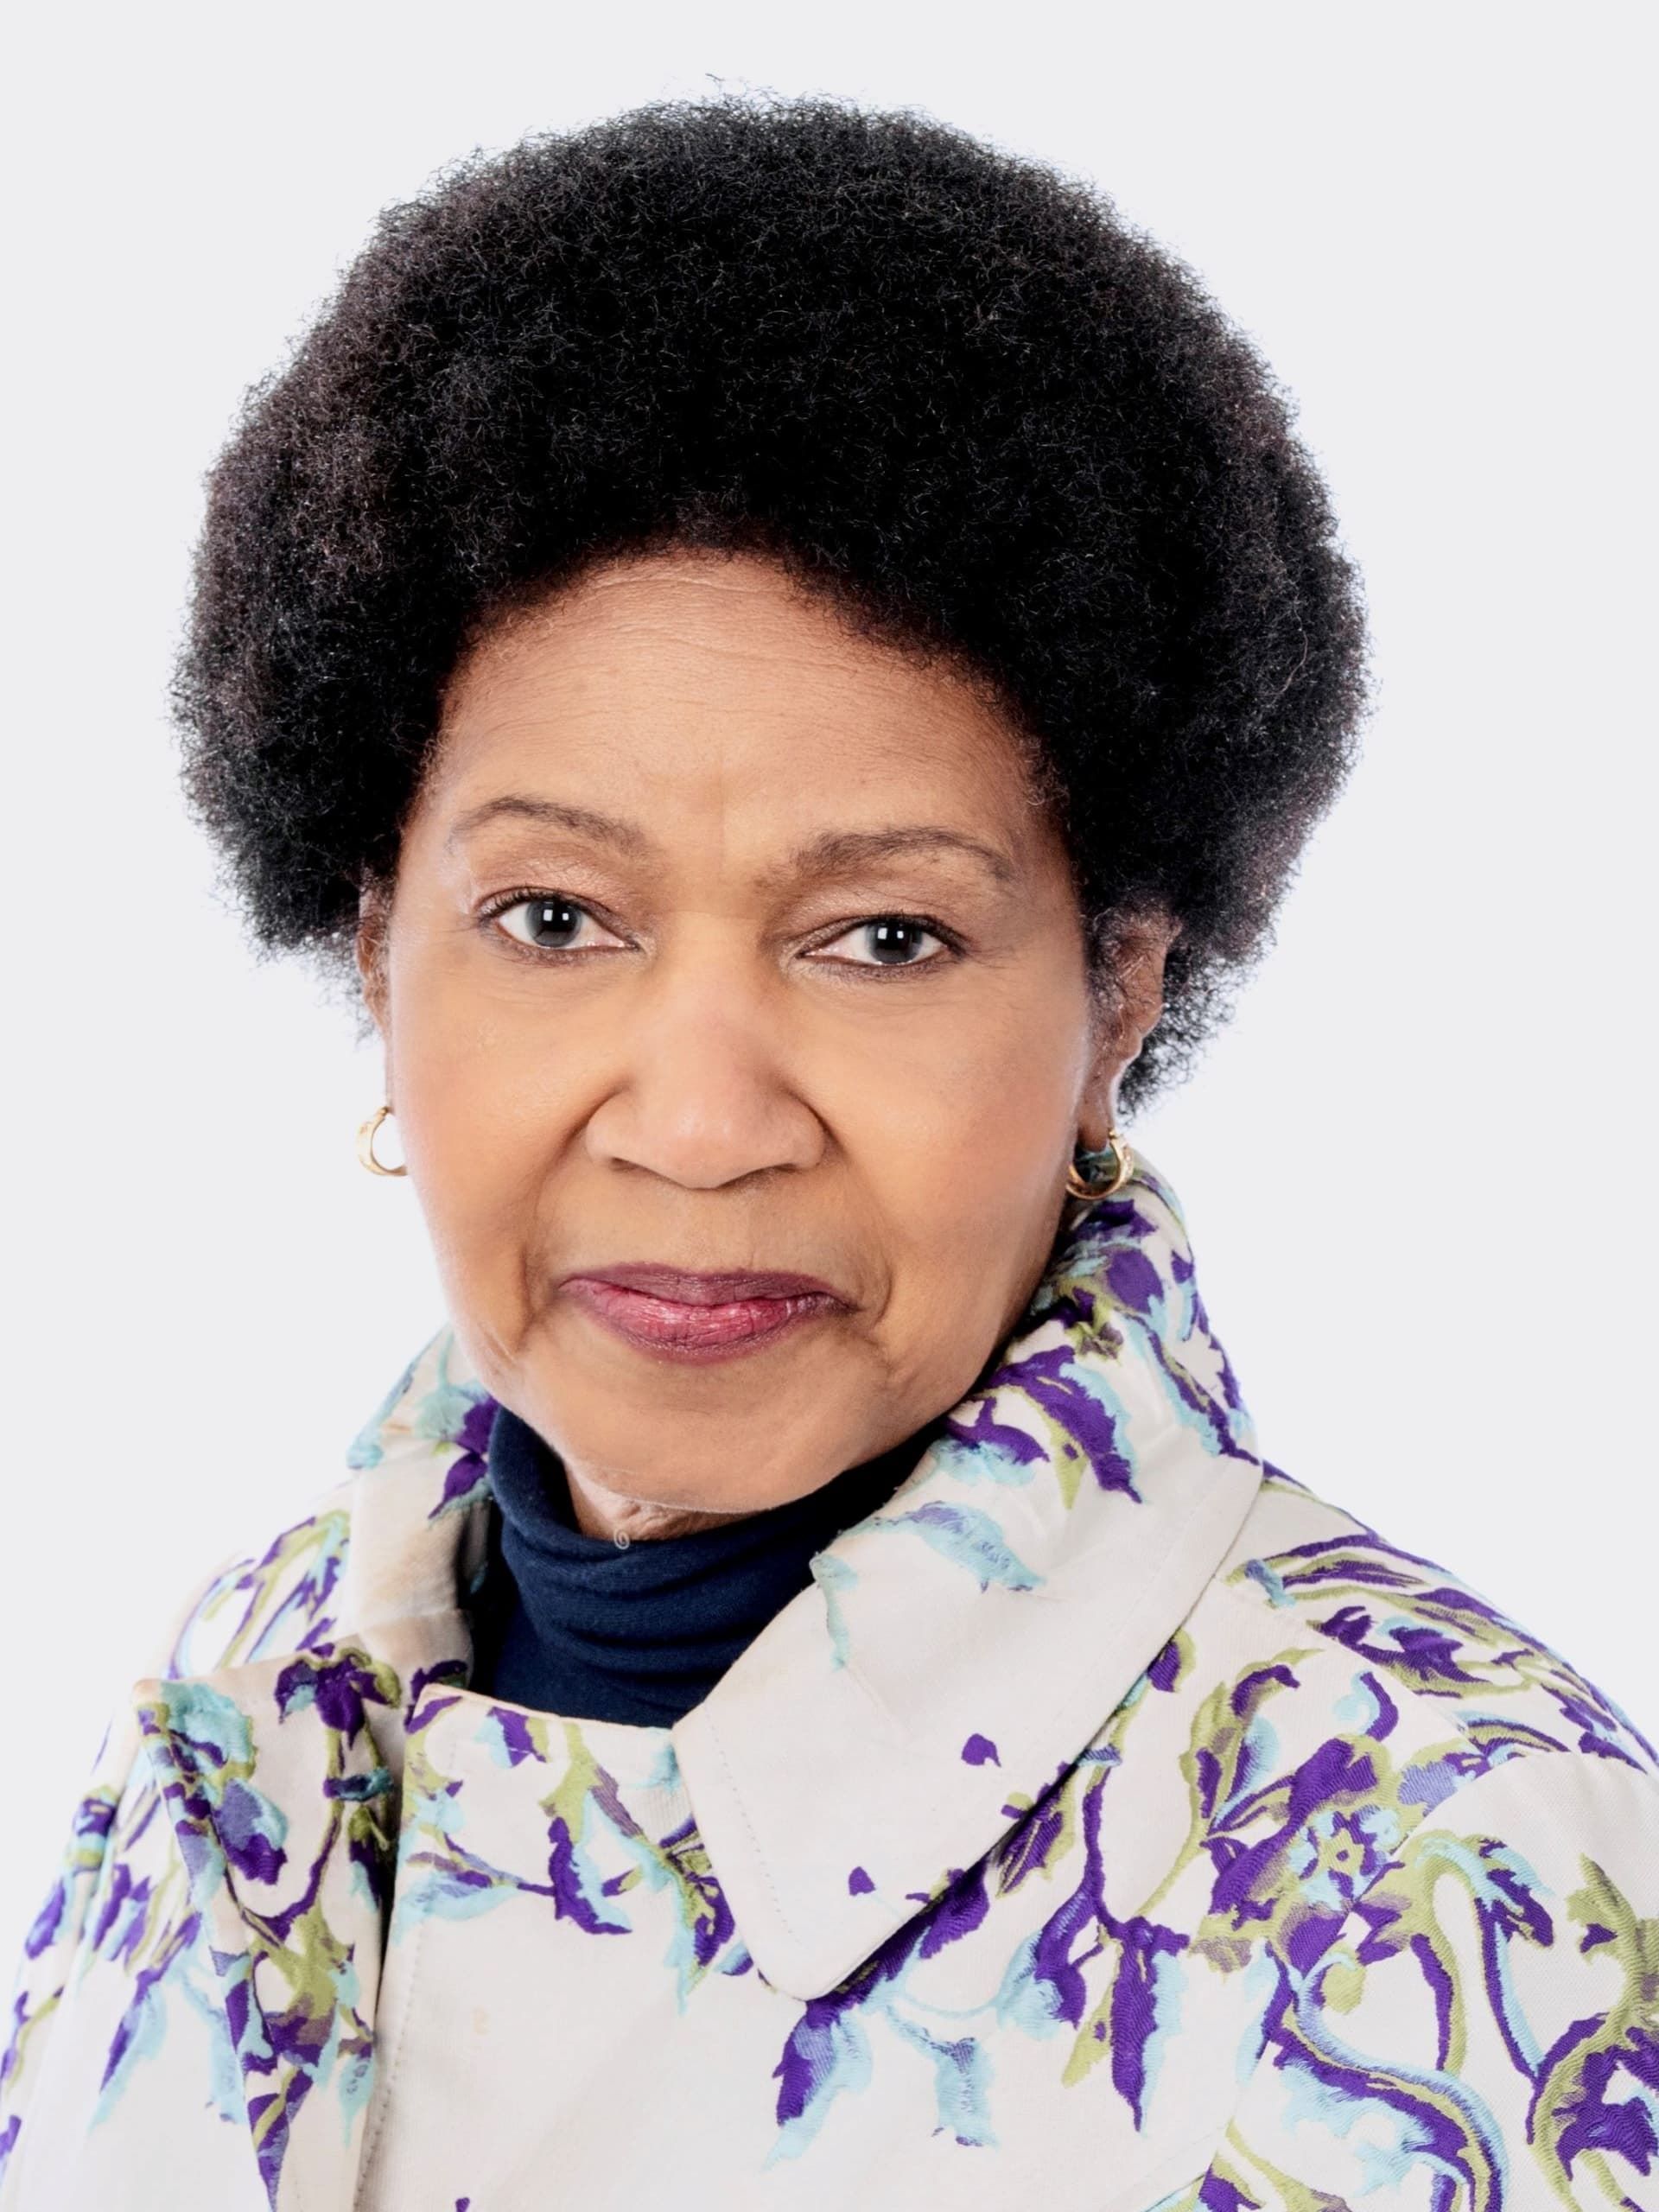 Mercedes-Benz South Africa Limited Appoints of Dr. Phumzile Mlambo-Ngcuka as Independent Non-Executive Director to the Board of Directors